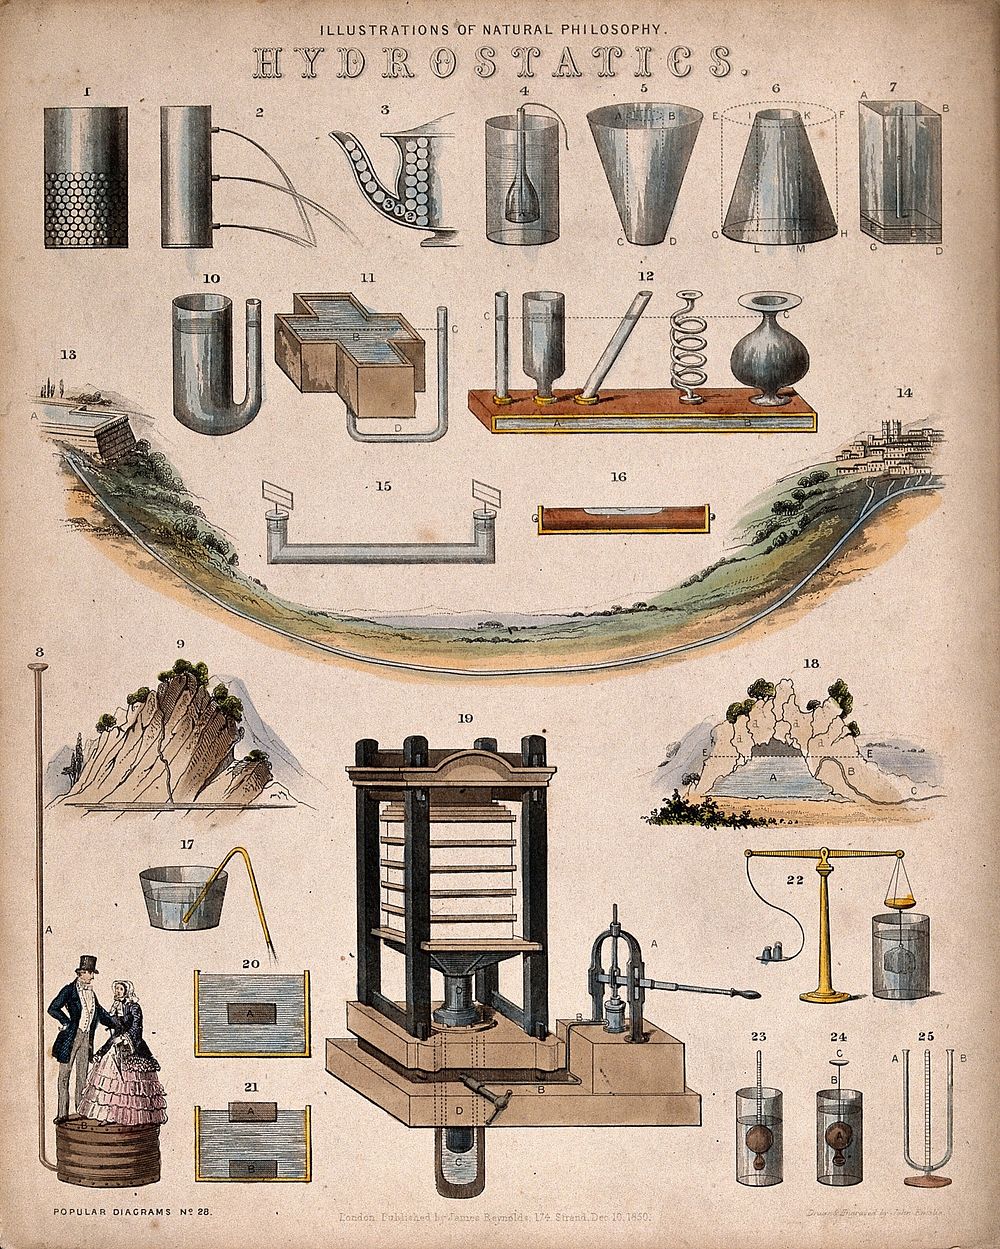 Hydraulics: the principles of hydrostatics. Coloured engraving by J. Emslie, 1850.